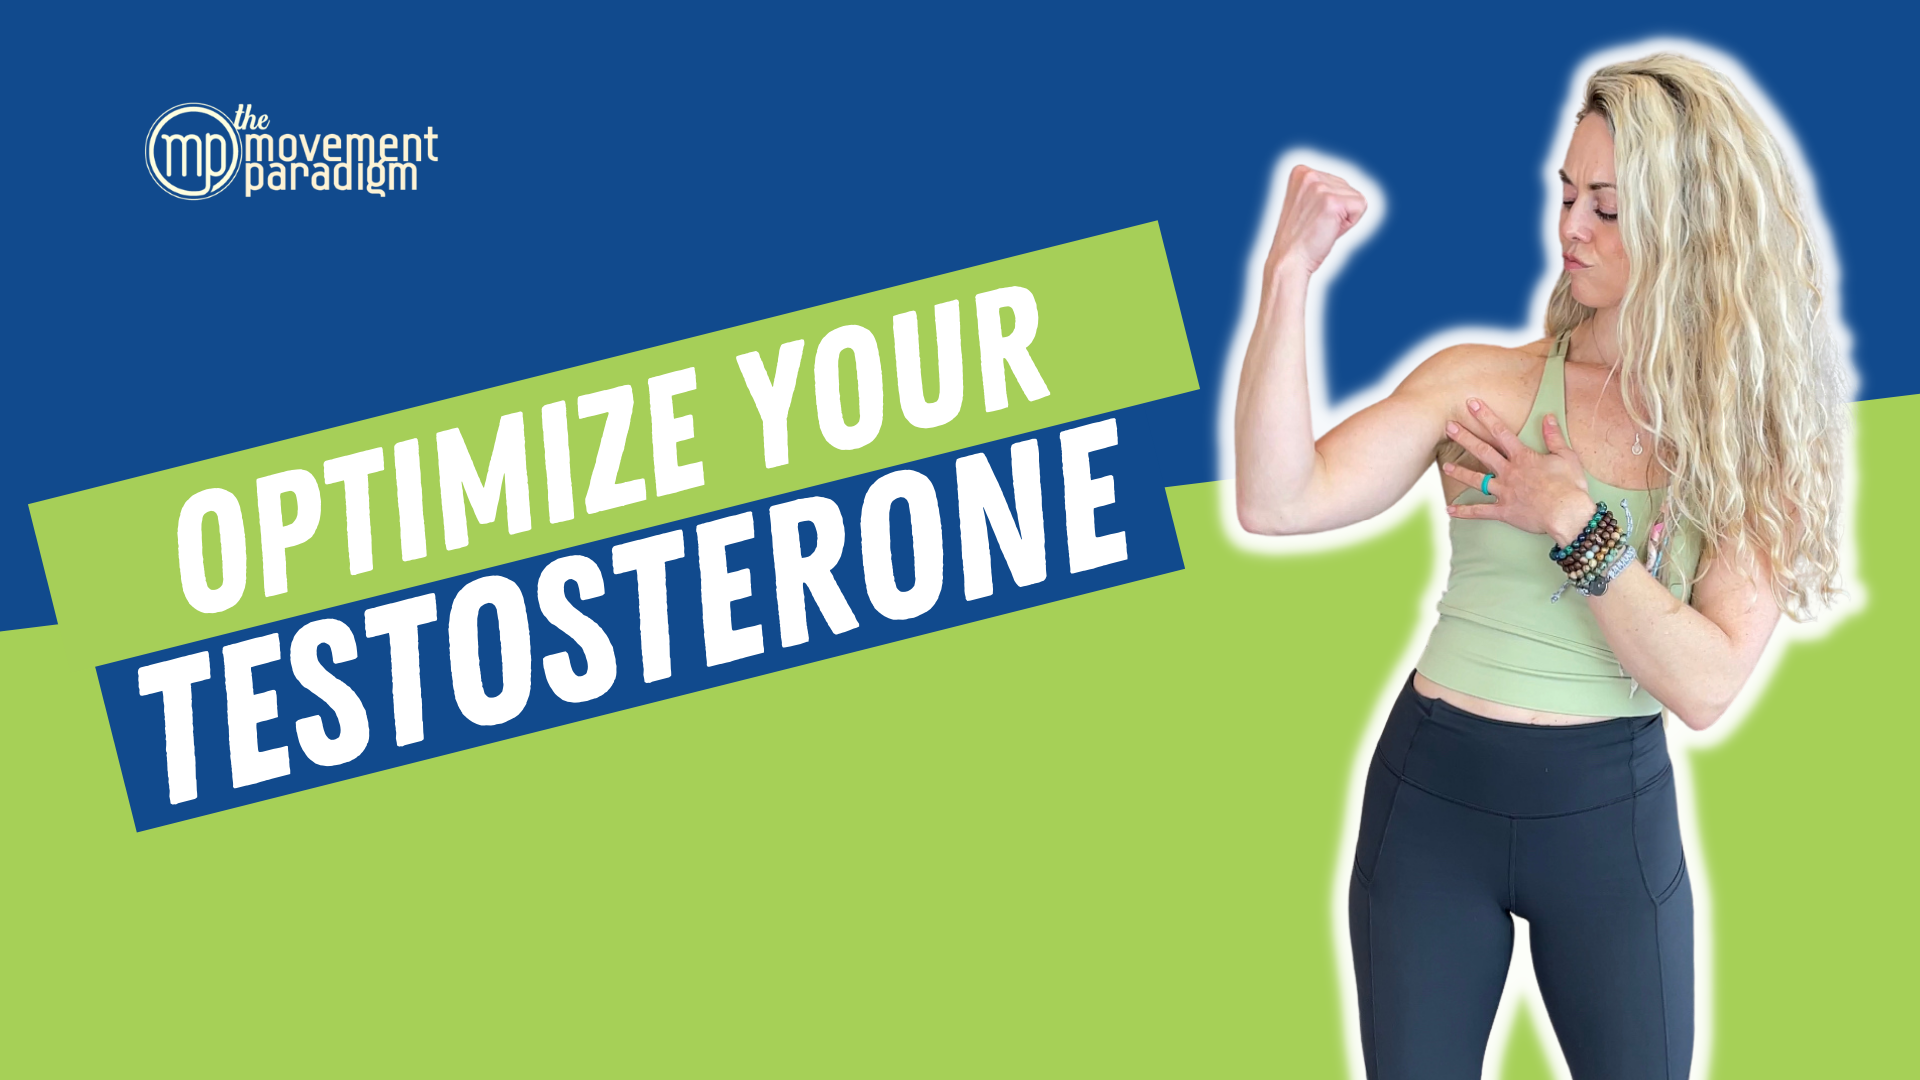 Optimize your testosterone